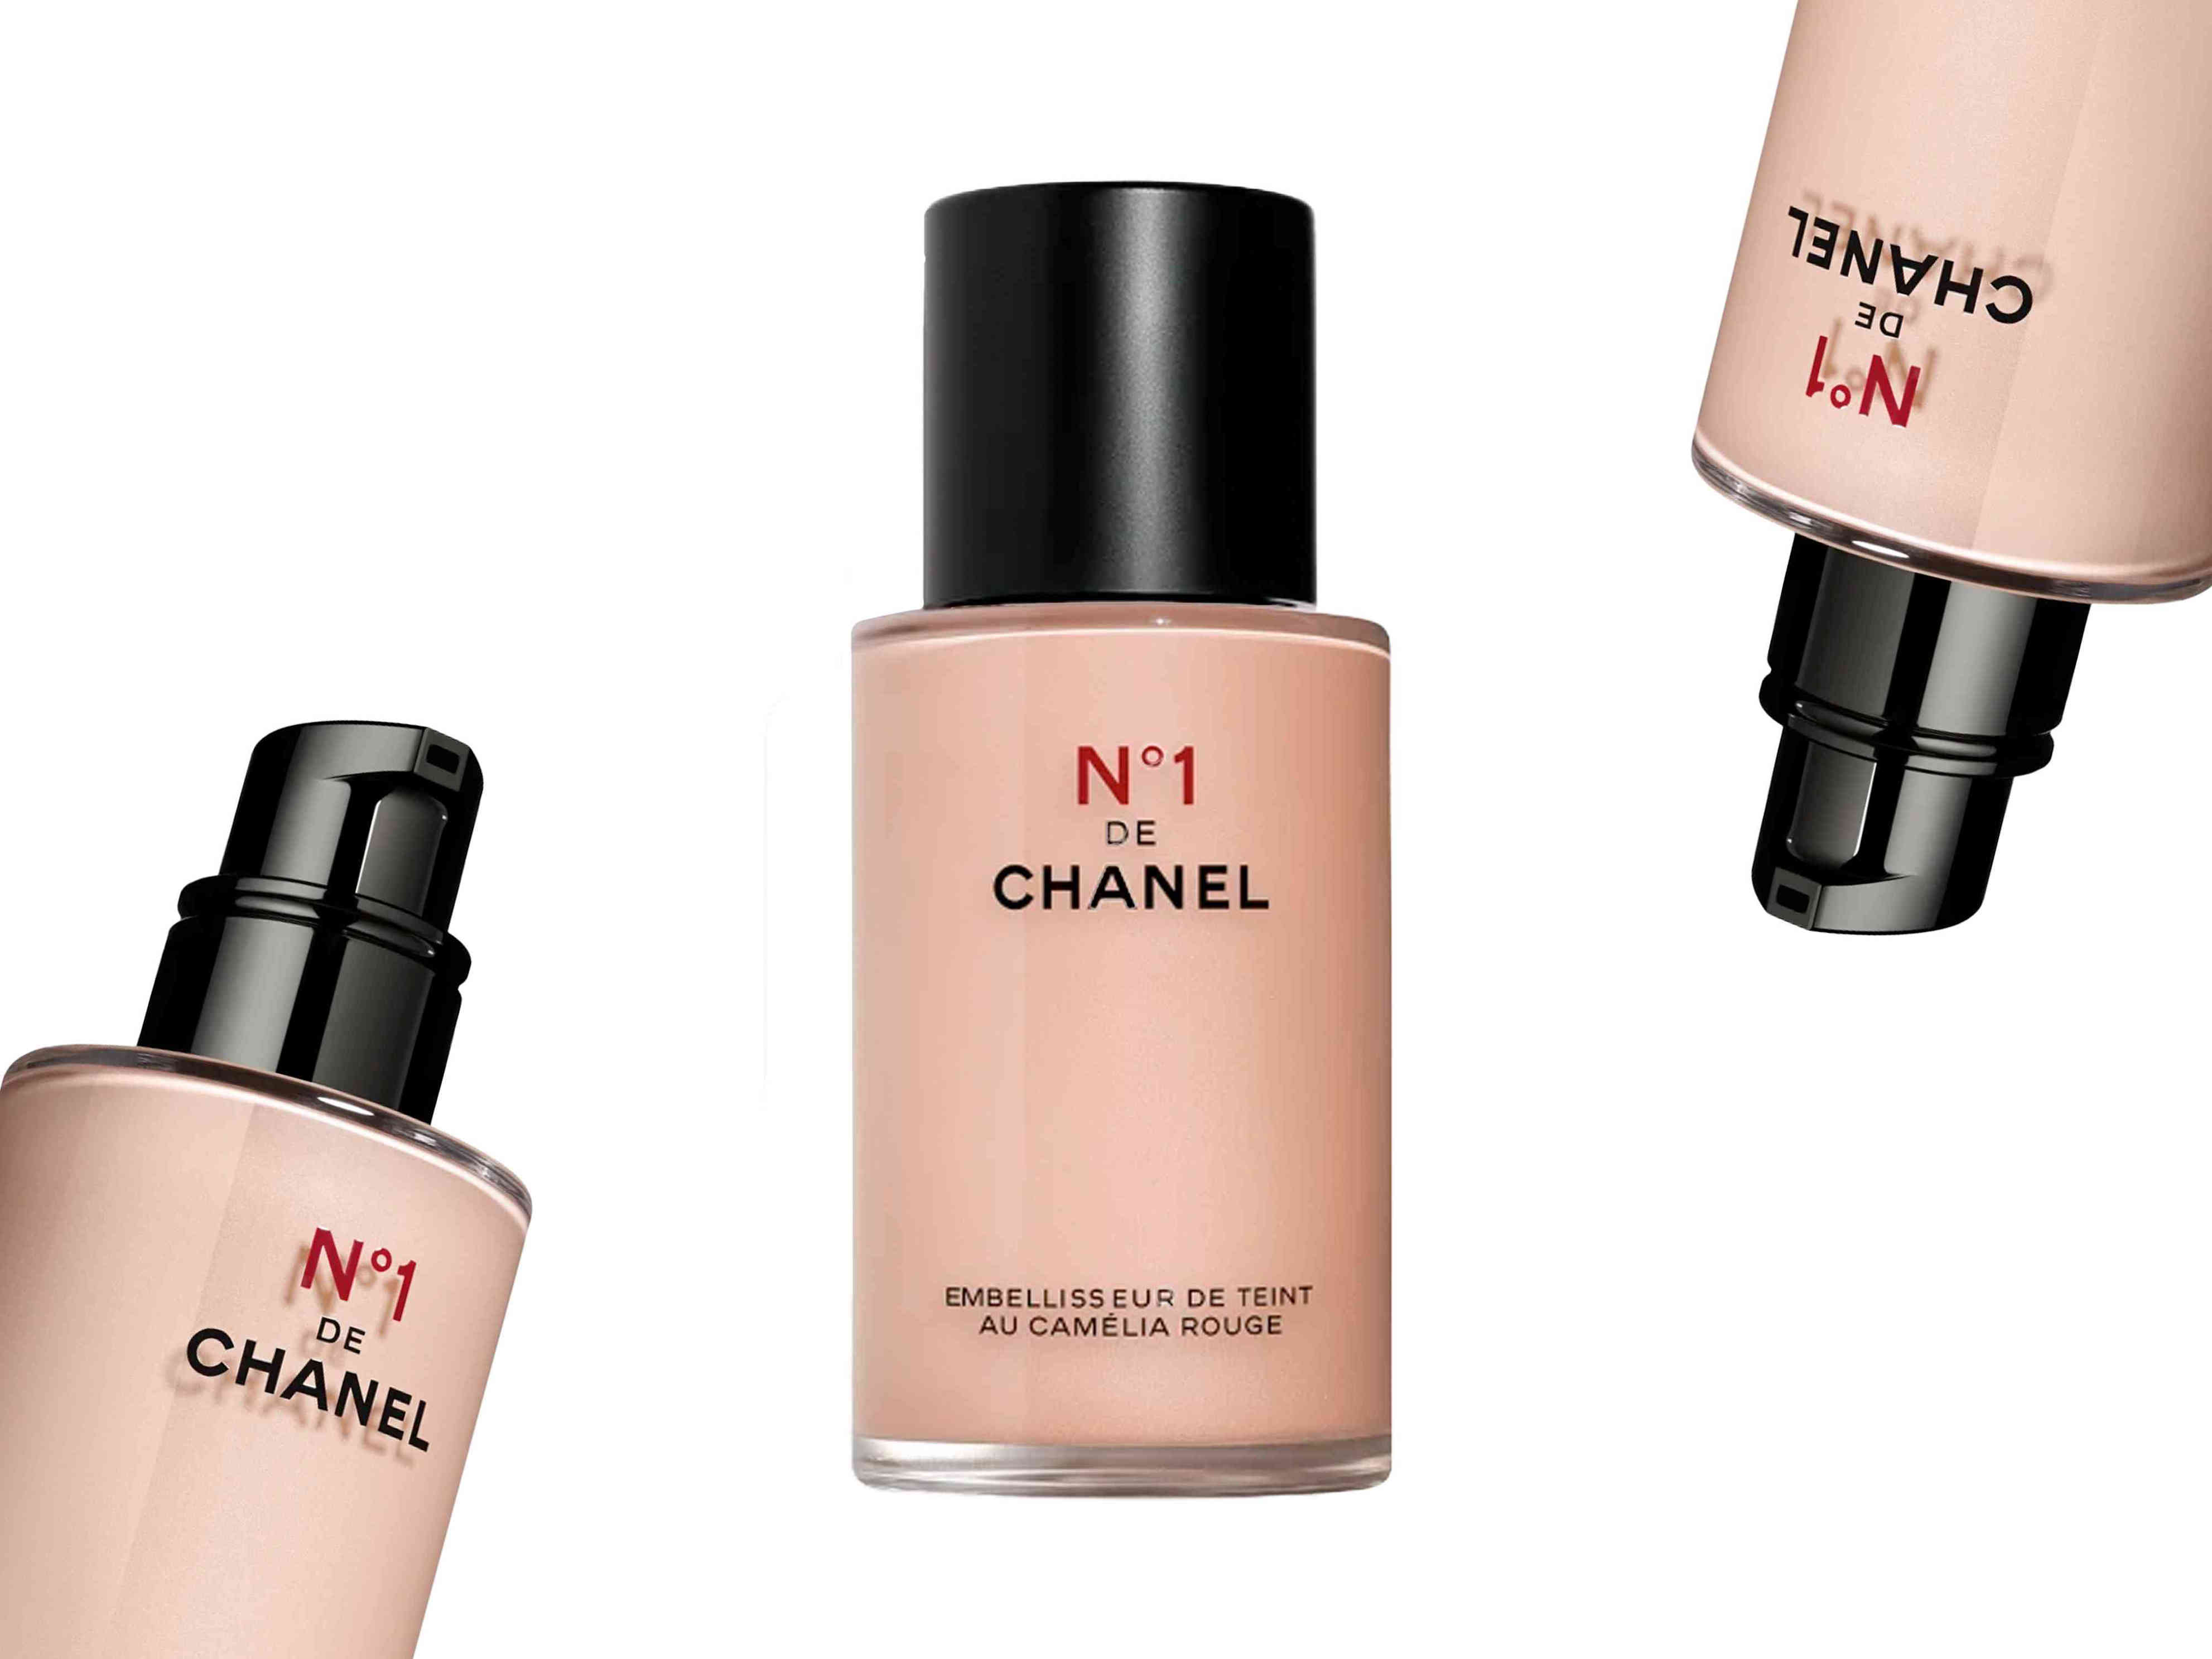 i replaced foundation with this blurring primer that’s part makeup, part skincare